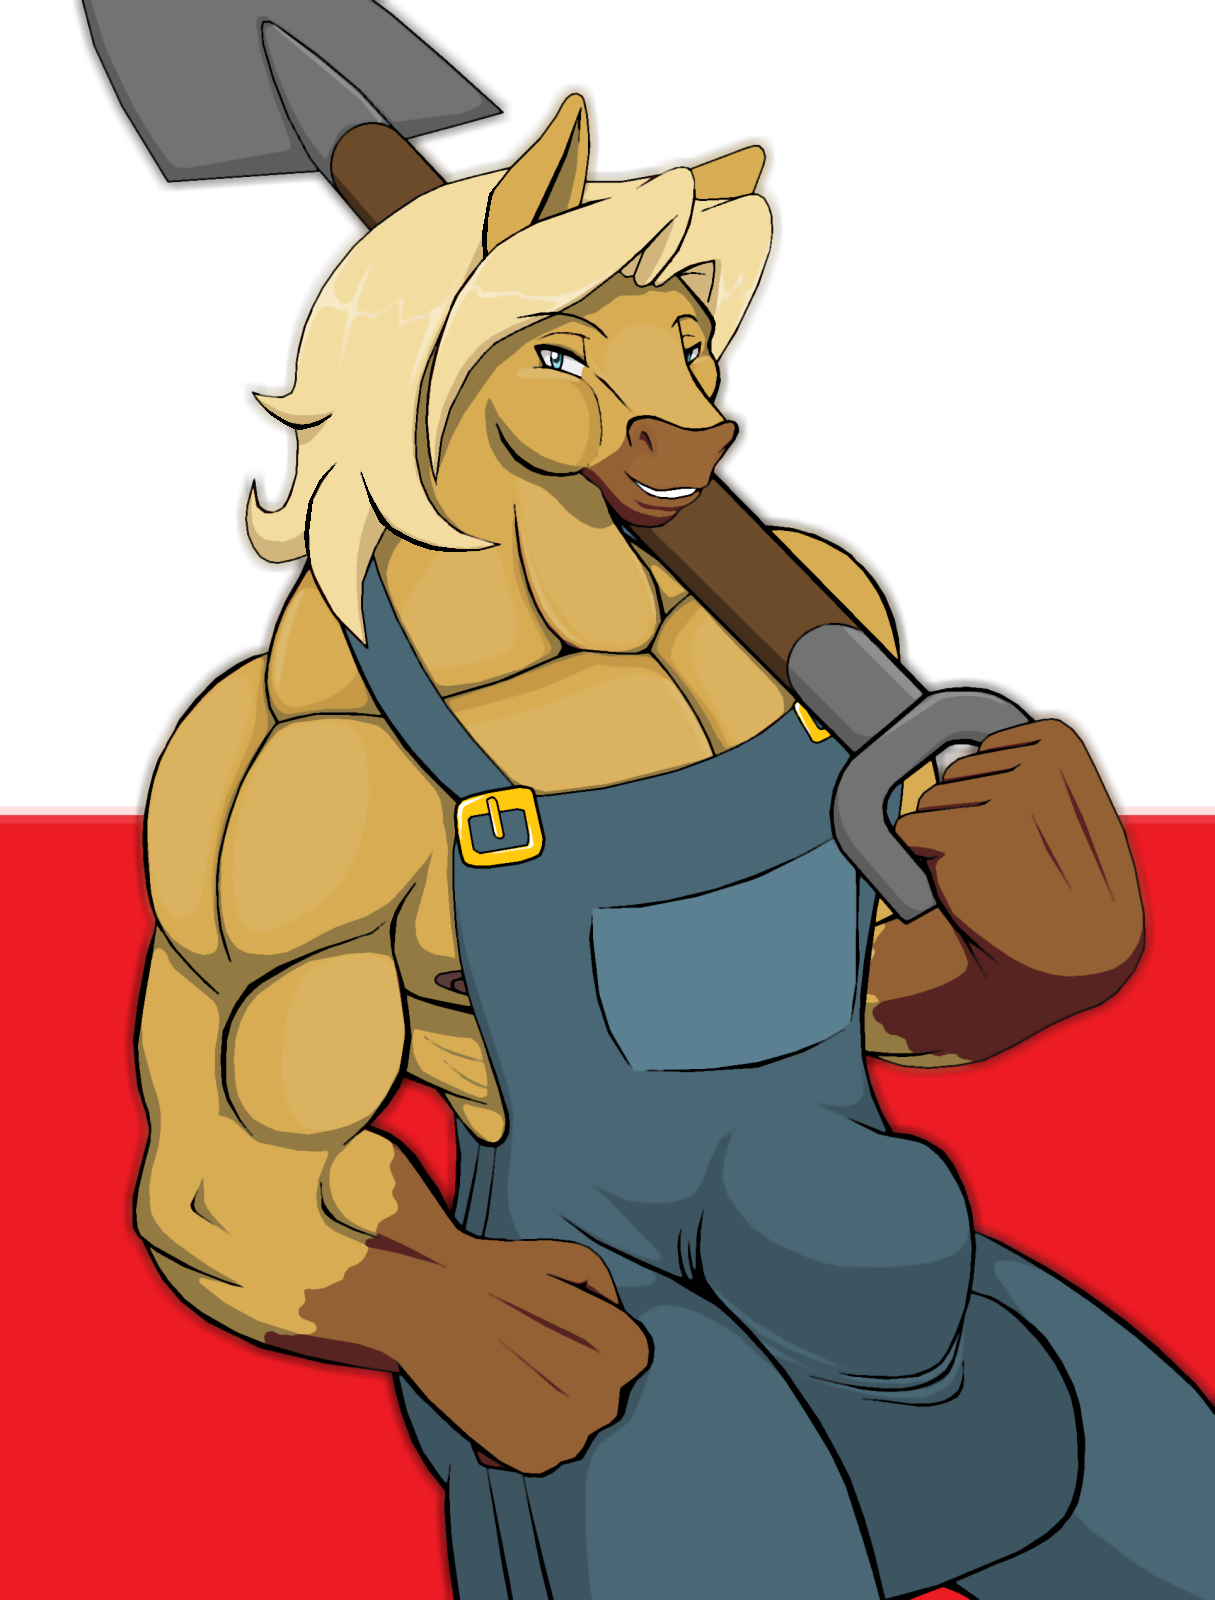 Ychan - m - males in overalls - ww2 act: 07 poland - by droll3